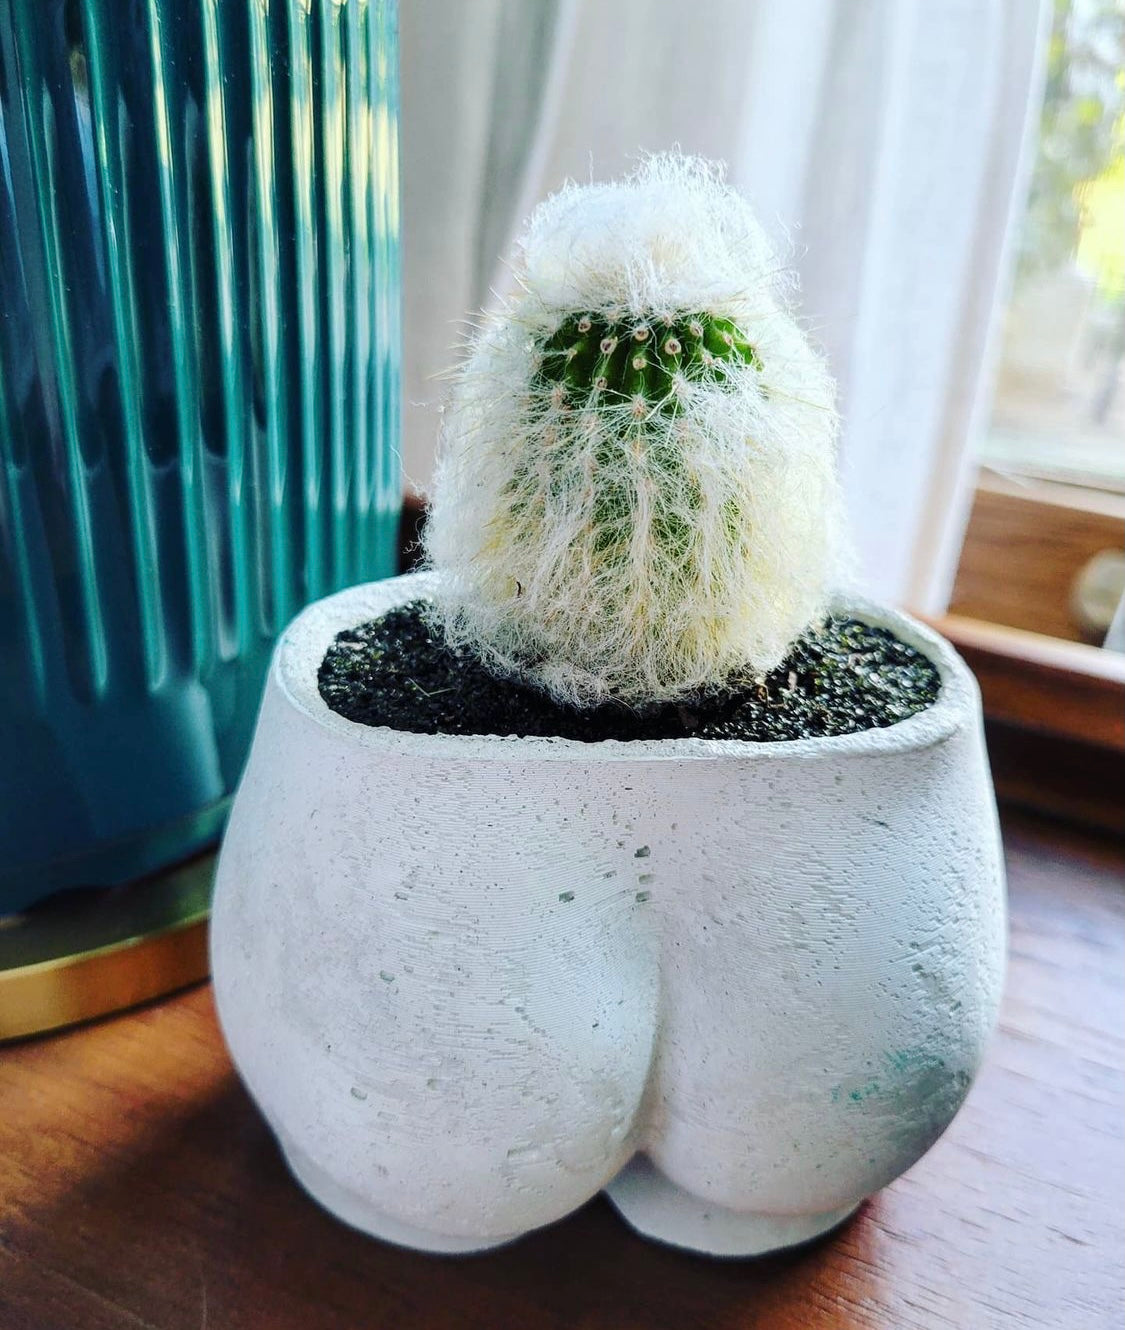 Queen City ‘Crete’s Small Booty Planter sits near a window with a cactus growing from inside. 